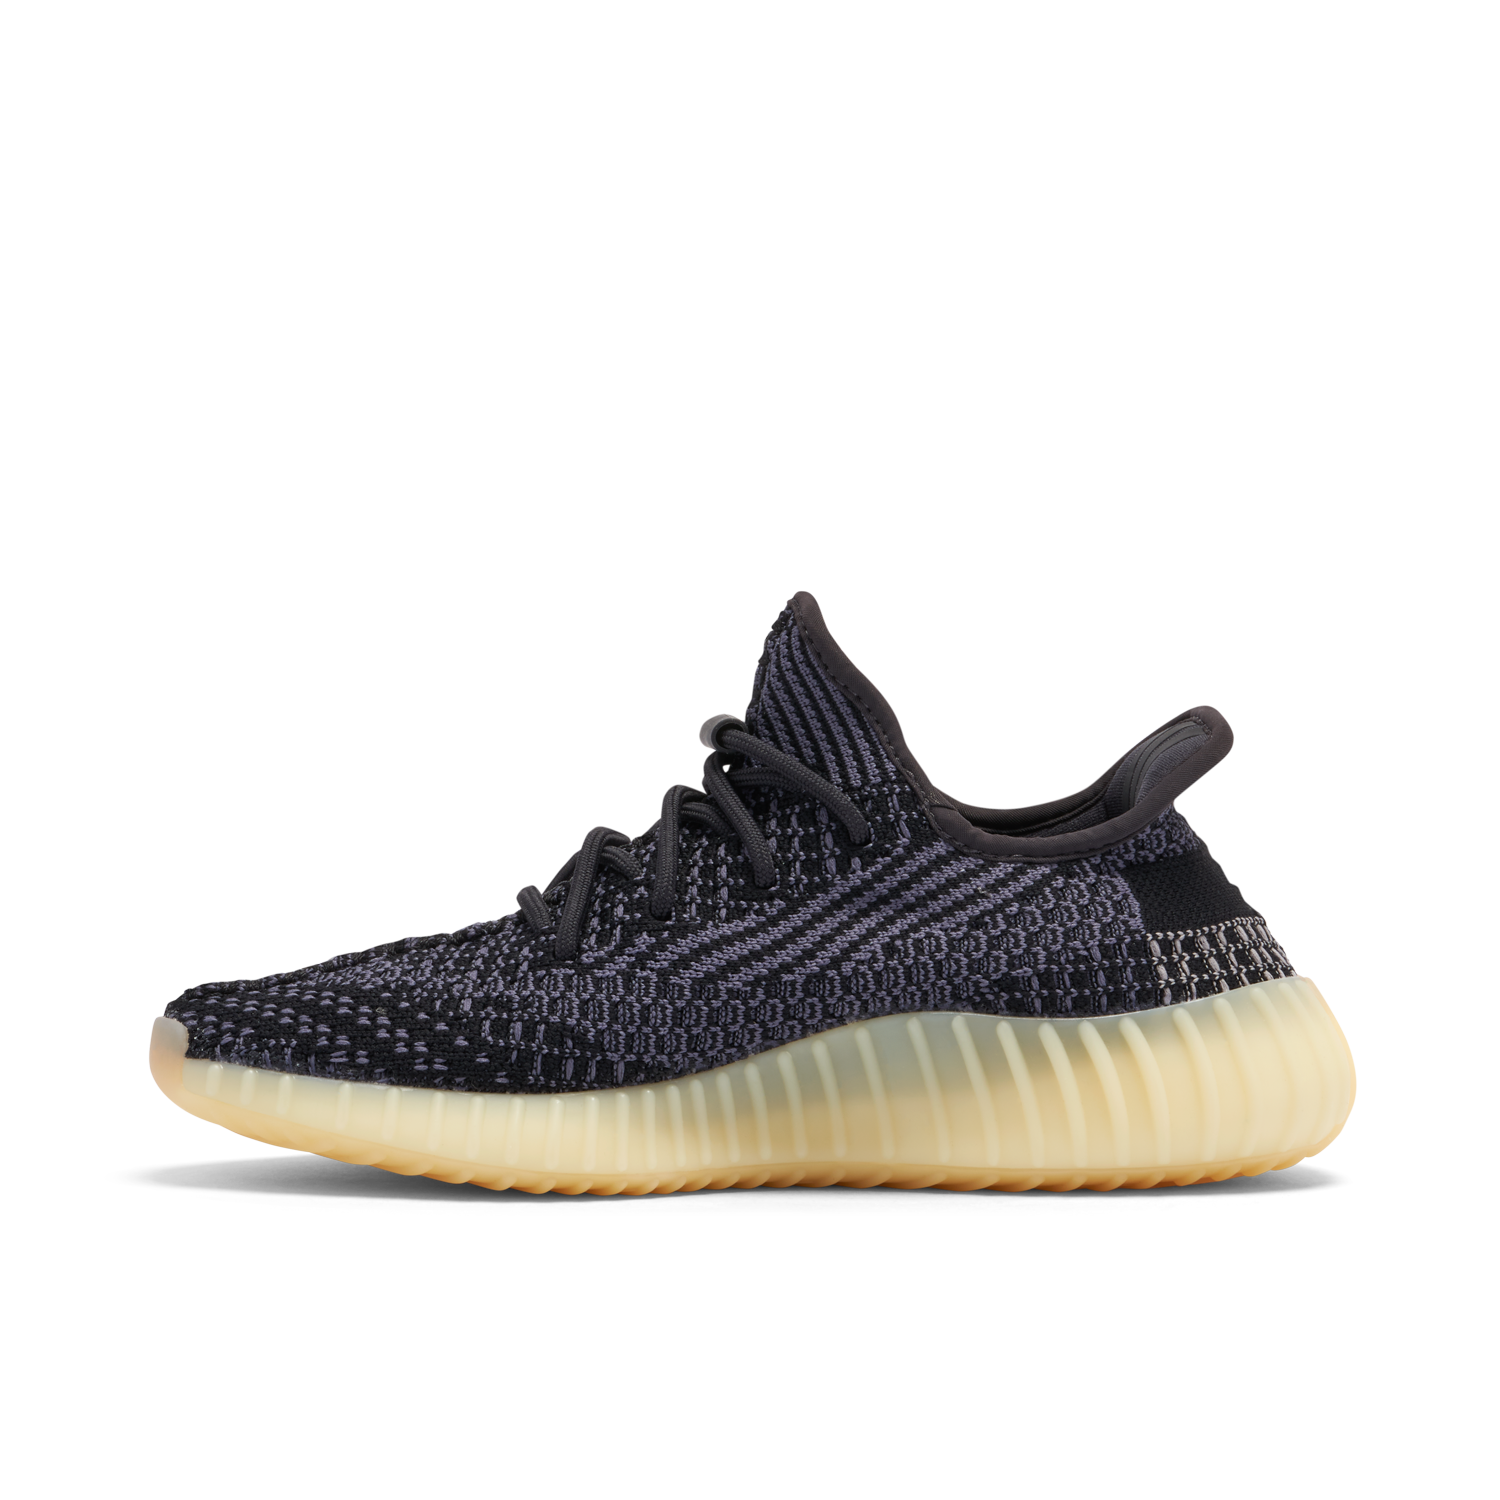 Yeezy Boost 350 V2 Carbon | FZ5000 | Laced